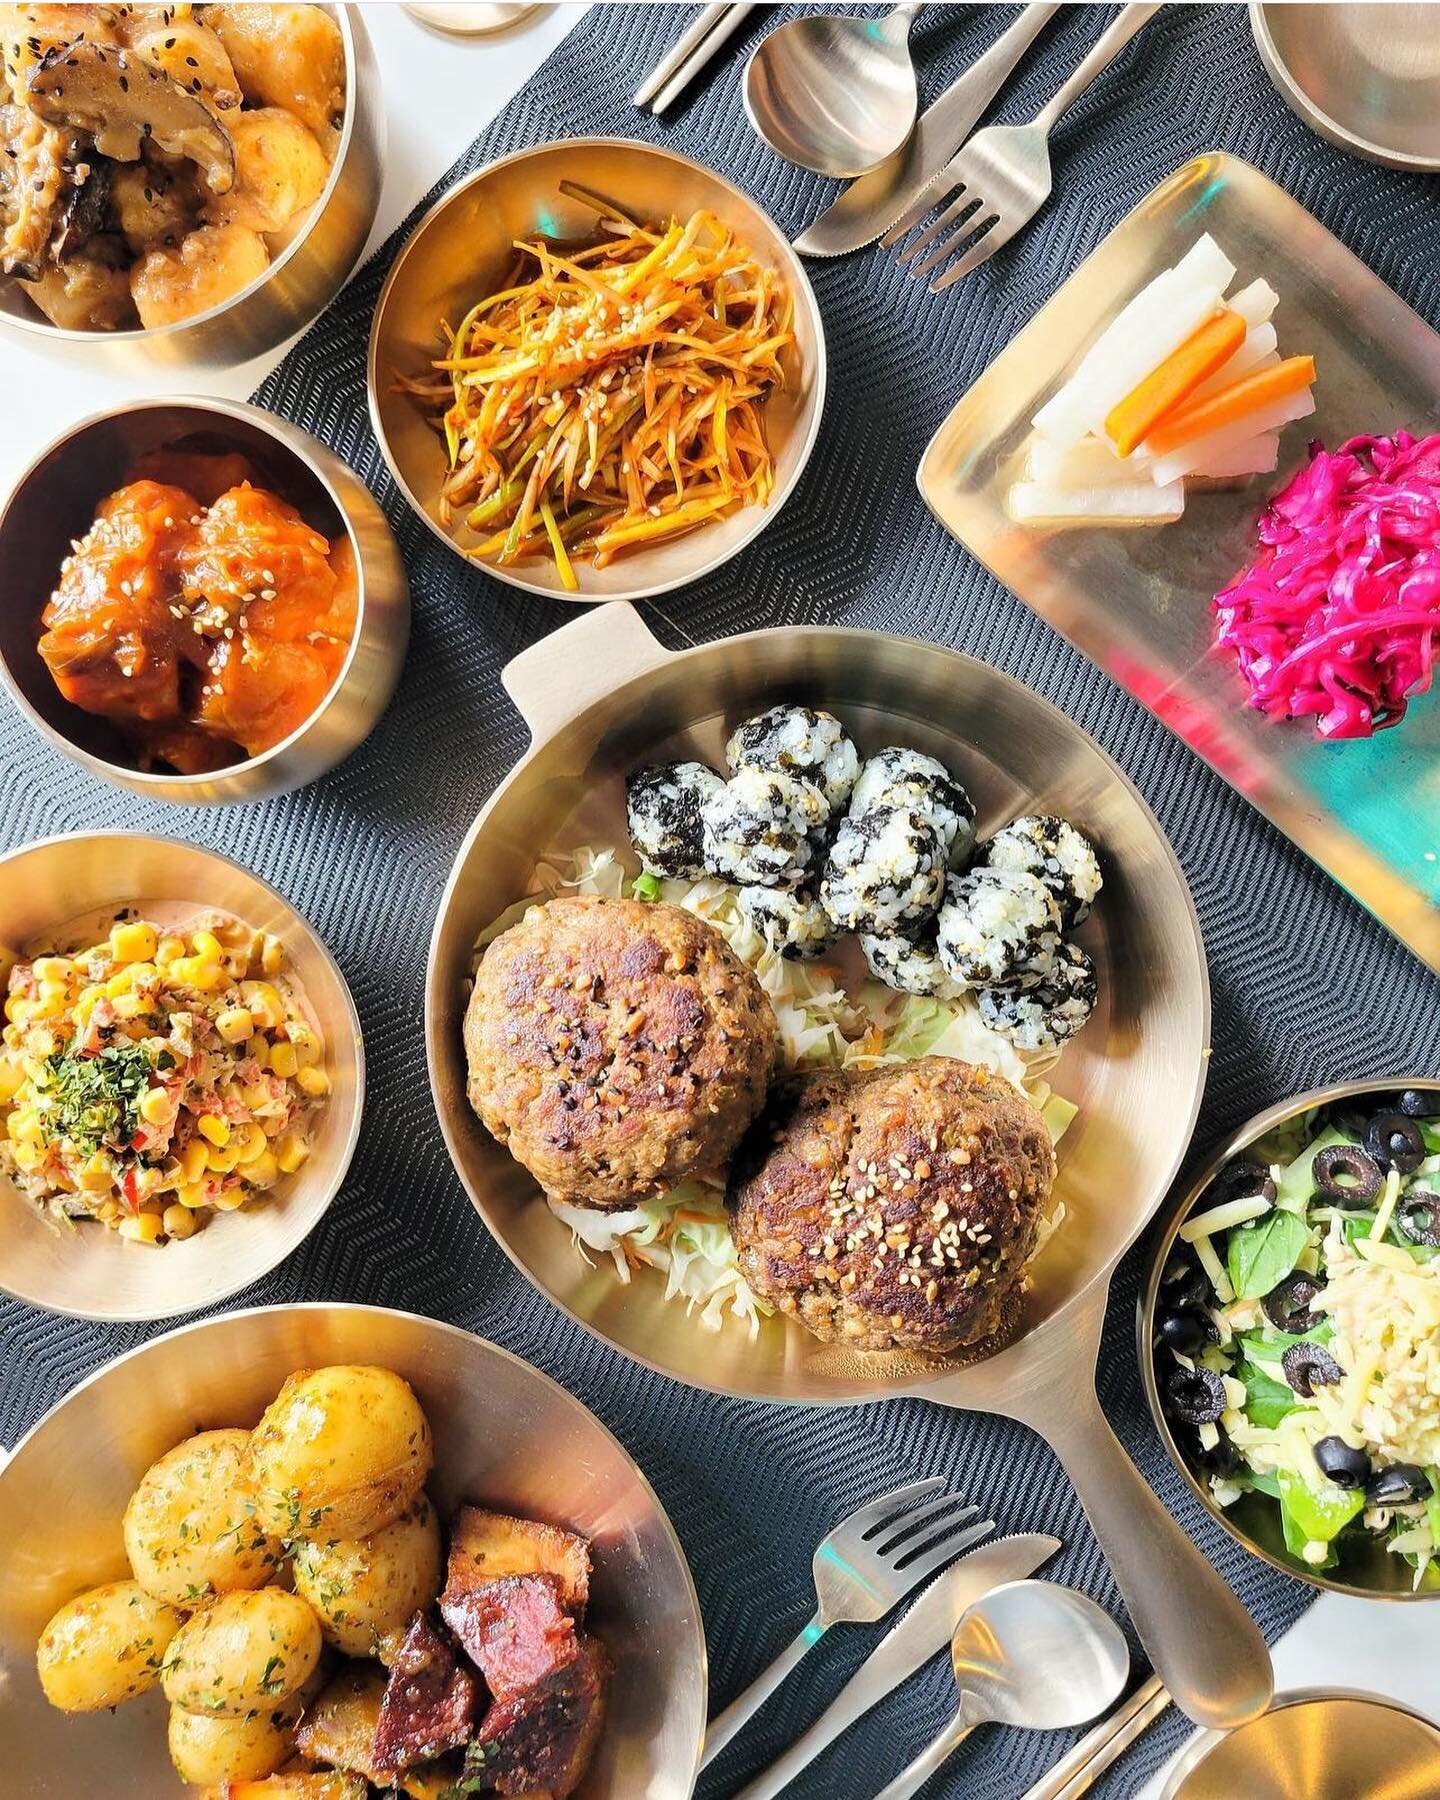 @meet_balls_nz is NZ&rsquo;s first Korean royal rissole restaurant originating as a royal court dish during the Joseon Dynasty. 

Check out their &lsquo;Surasang&rsquo; Kings Dinner Table experience for 2 served in &lsquo;Bang Jja&rsquo; the Korean t